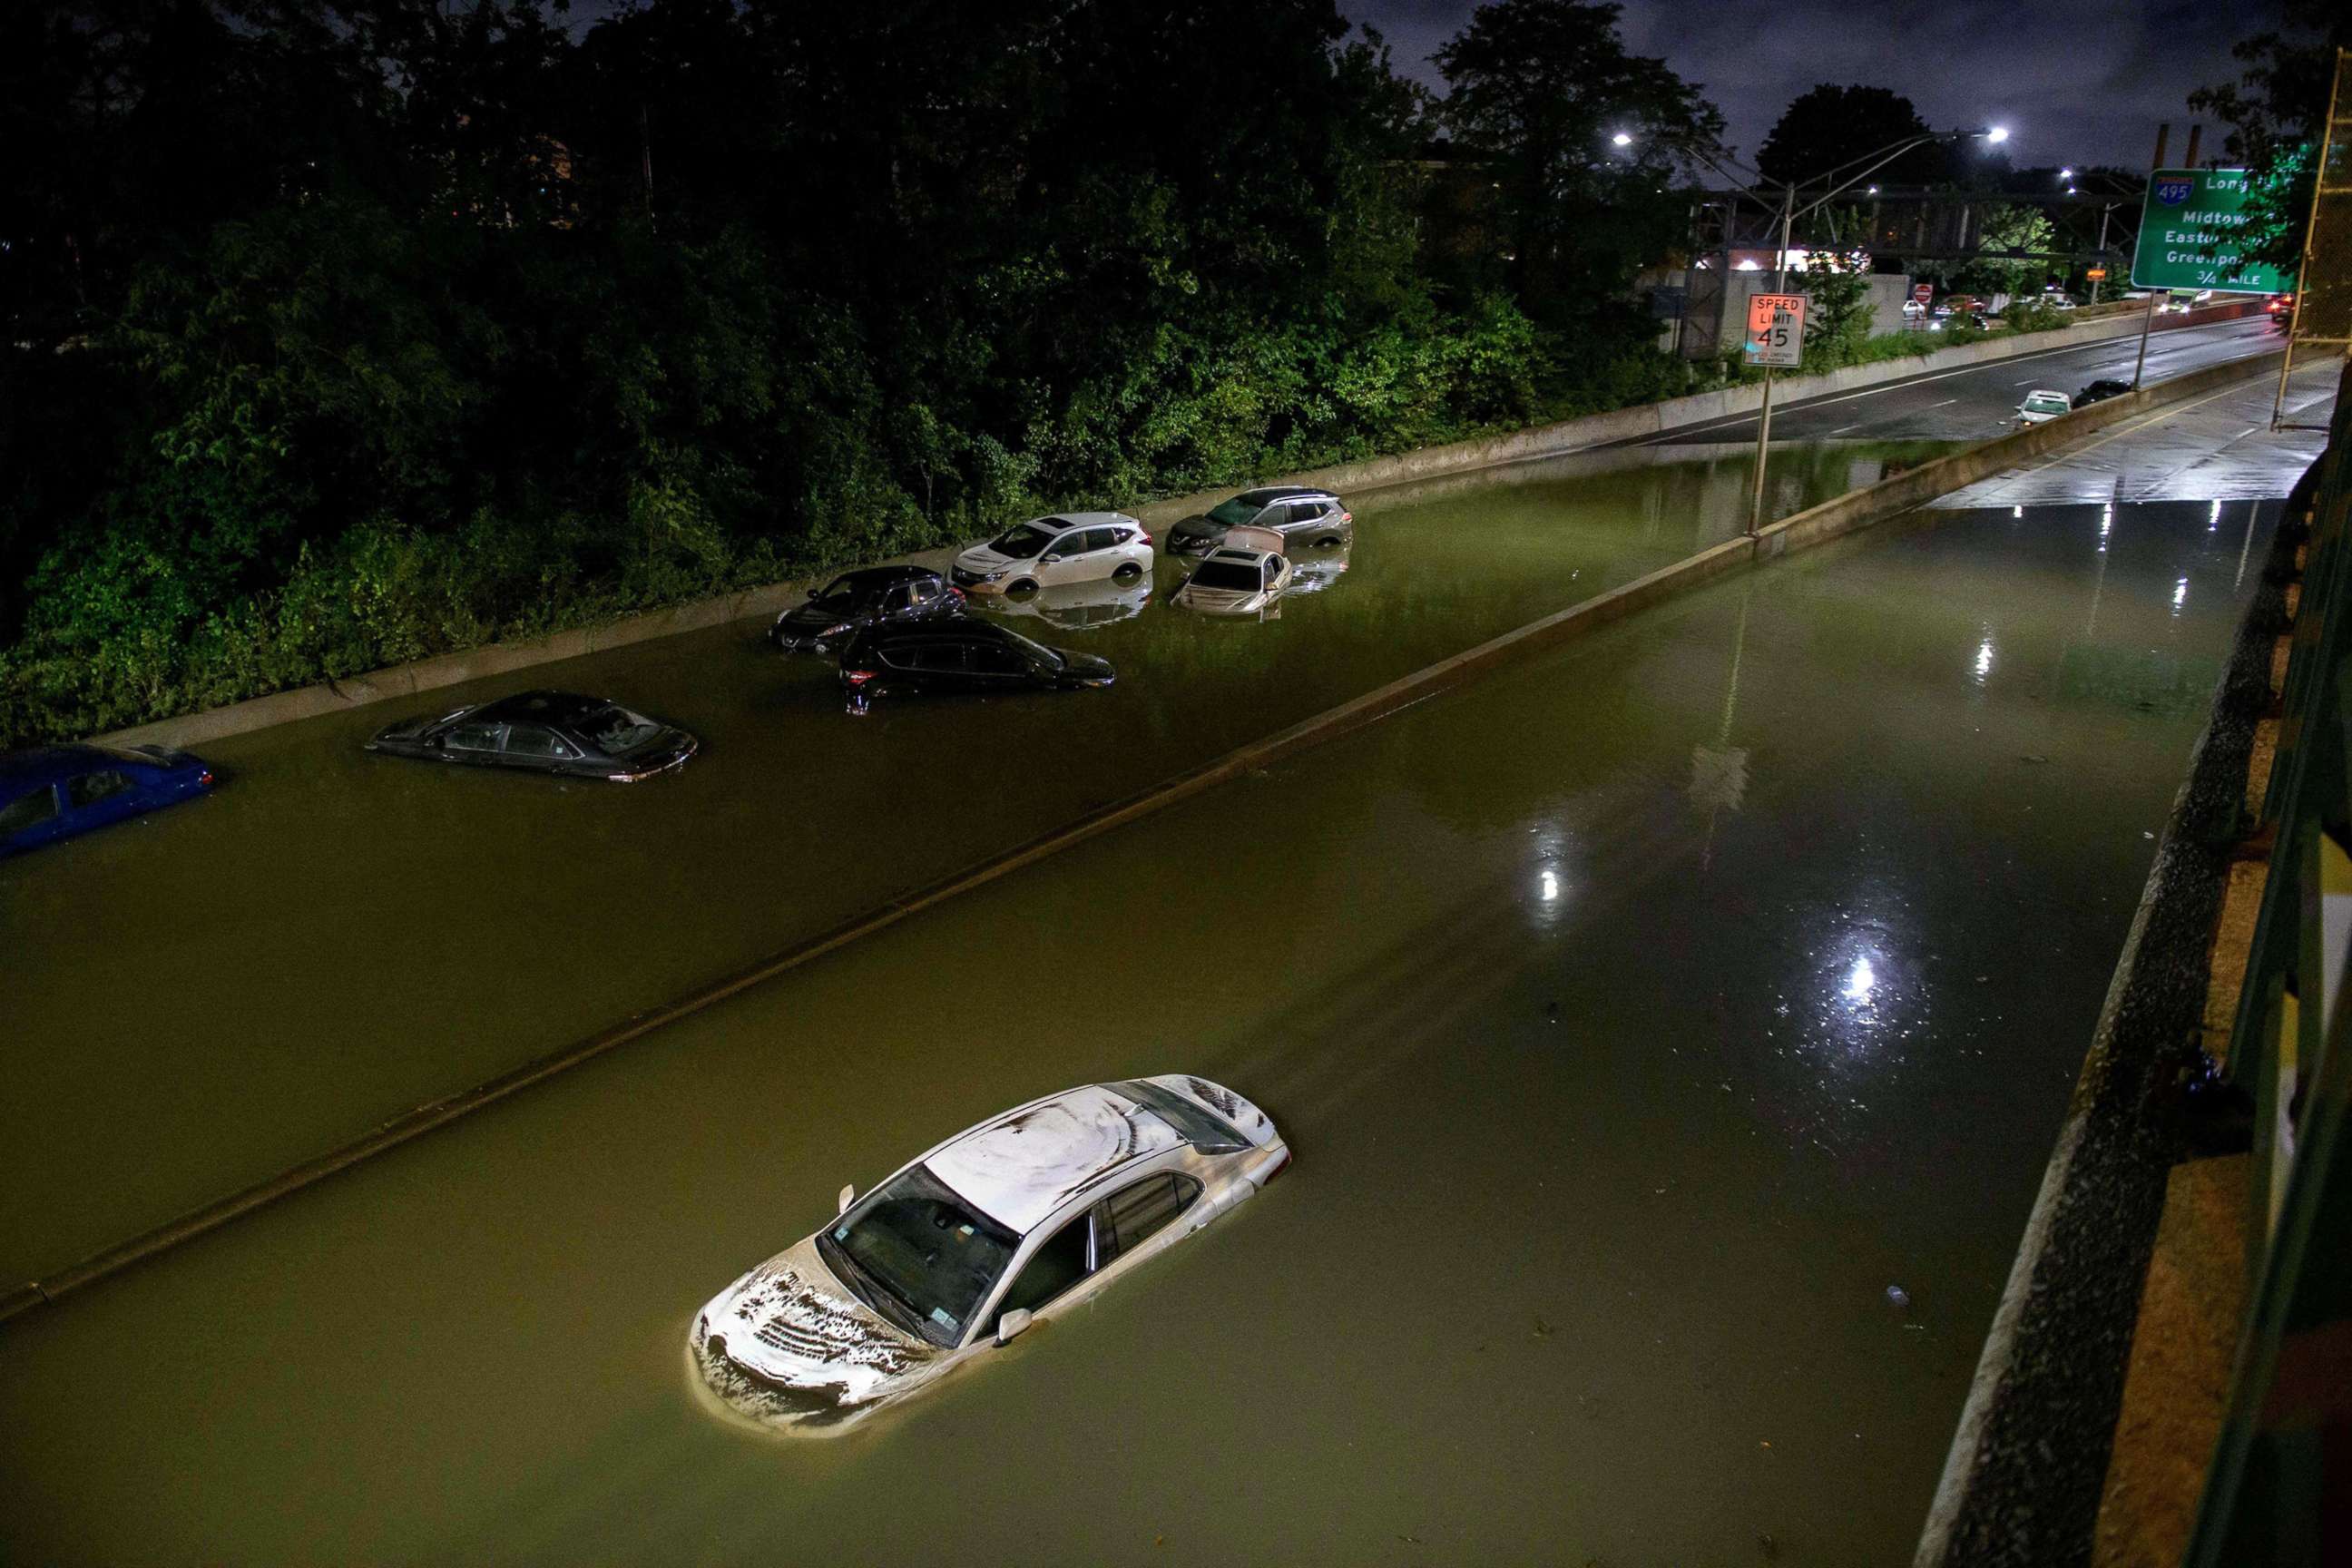 PHOTO: Floodwater surrounds vehicles following heavy rain on an expressway in Brooklyn, N.Y., Sept. 2, 2021.